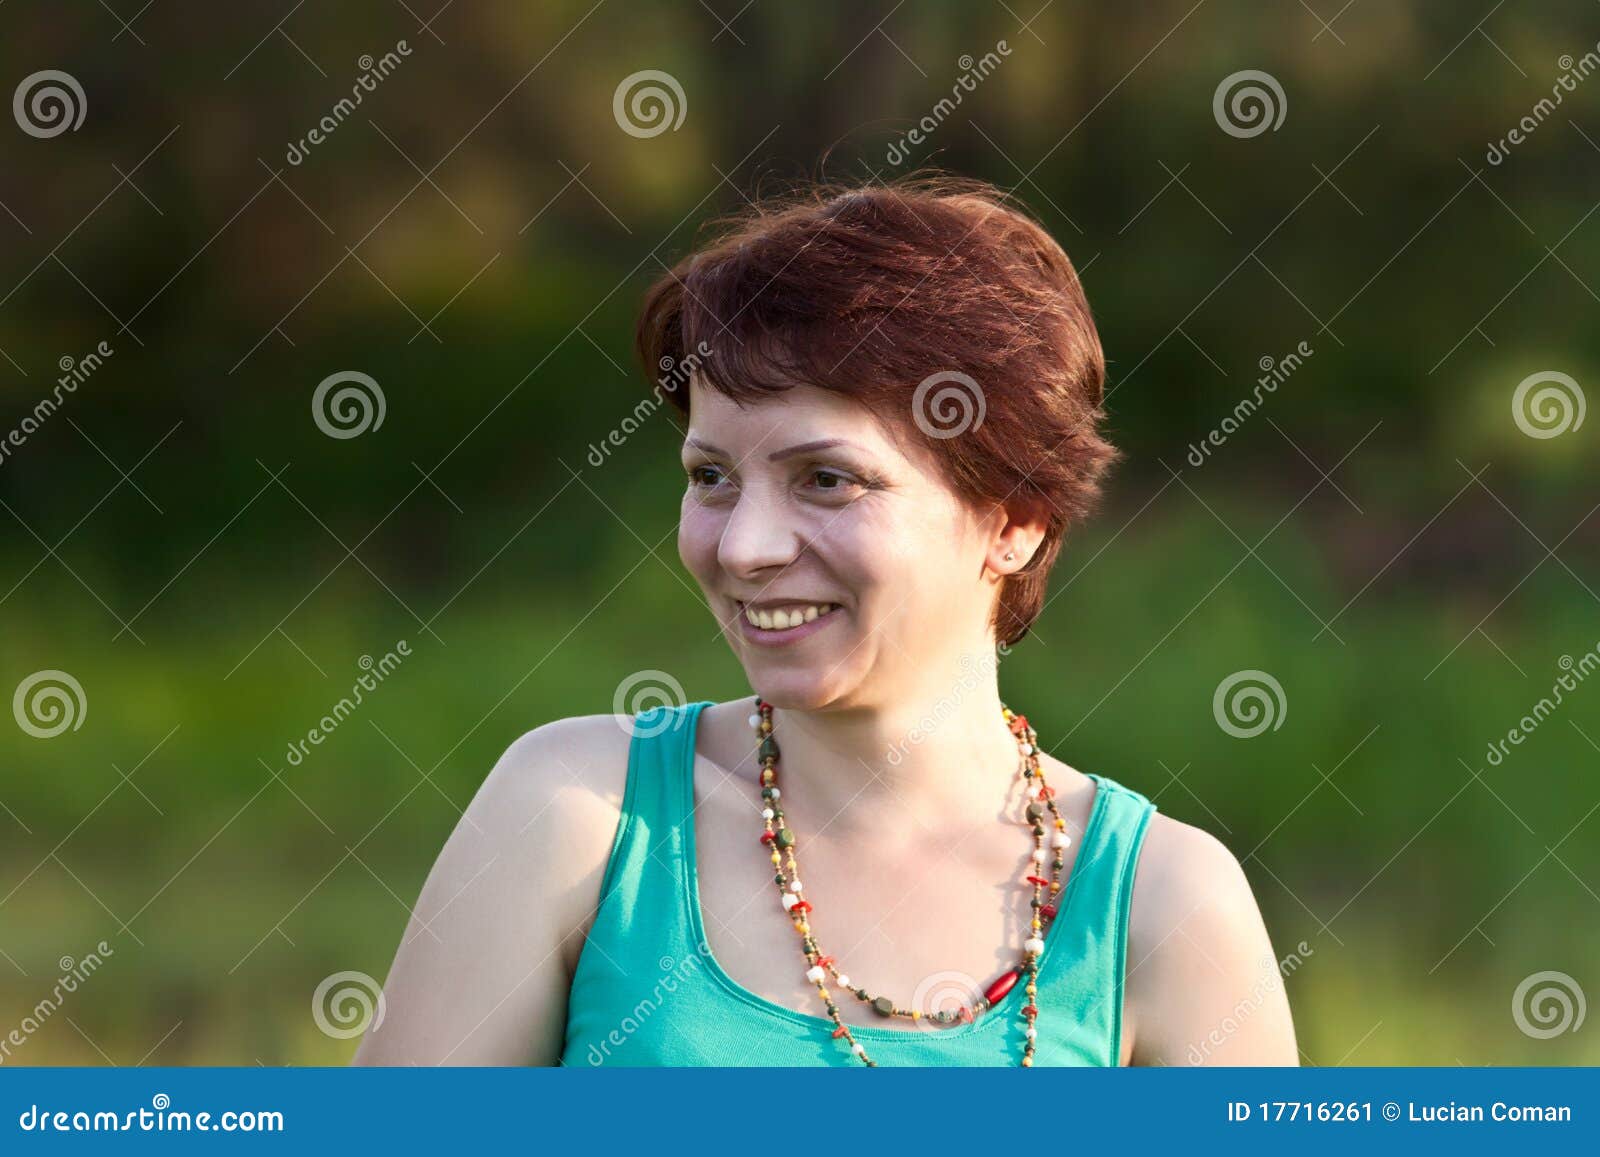 Middle age caucasian woman stock image. Image of colour - 17716261